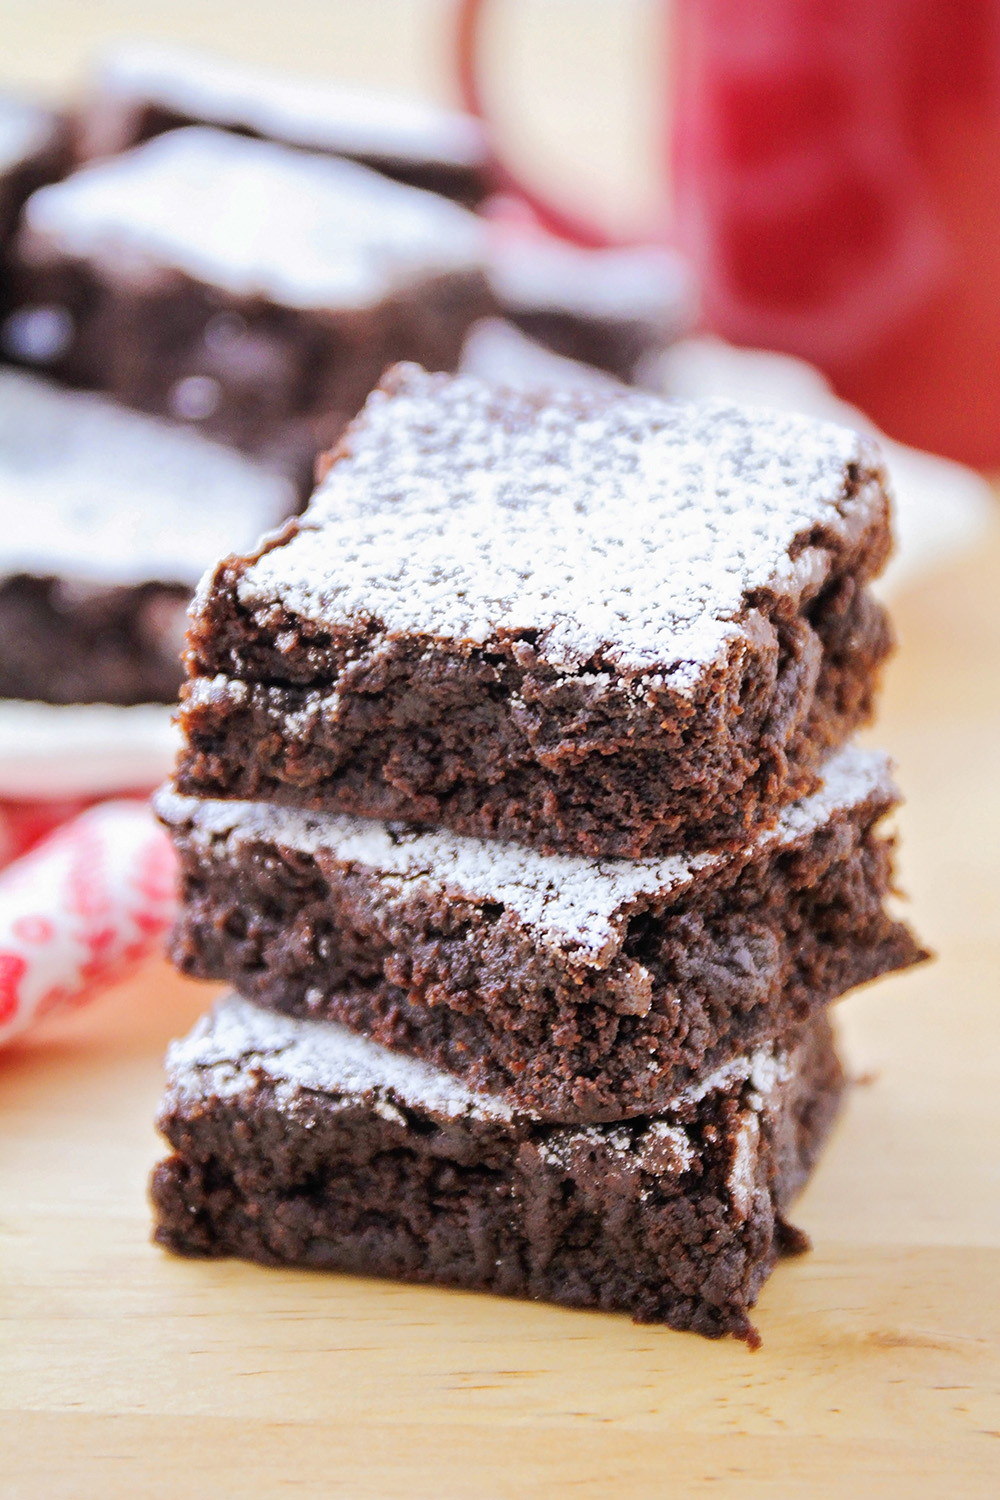 These delicious chocolate gingerbread brownies have a sweet combination of dark chocolate and a hint of spice, and are totally unforgettable!